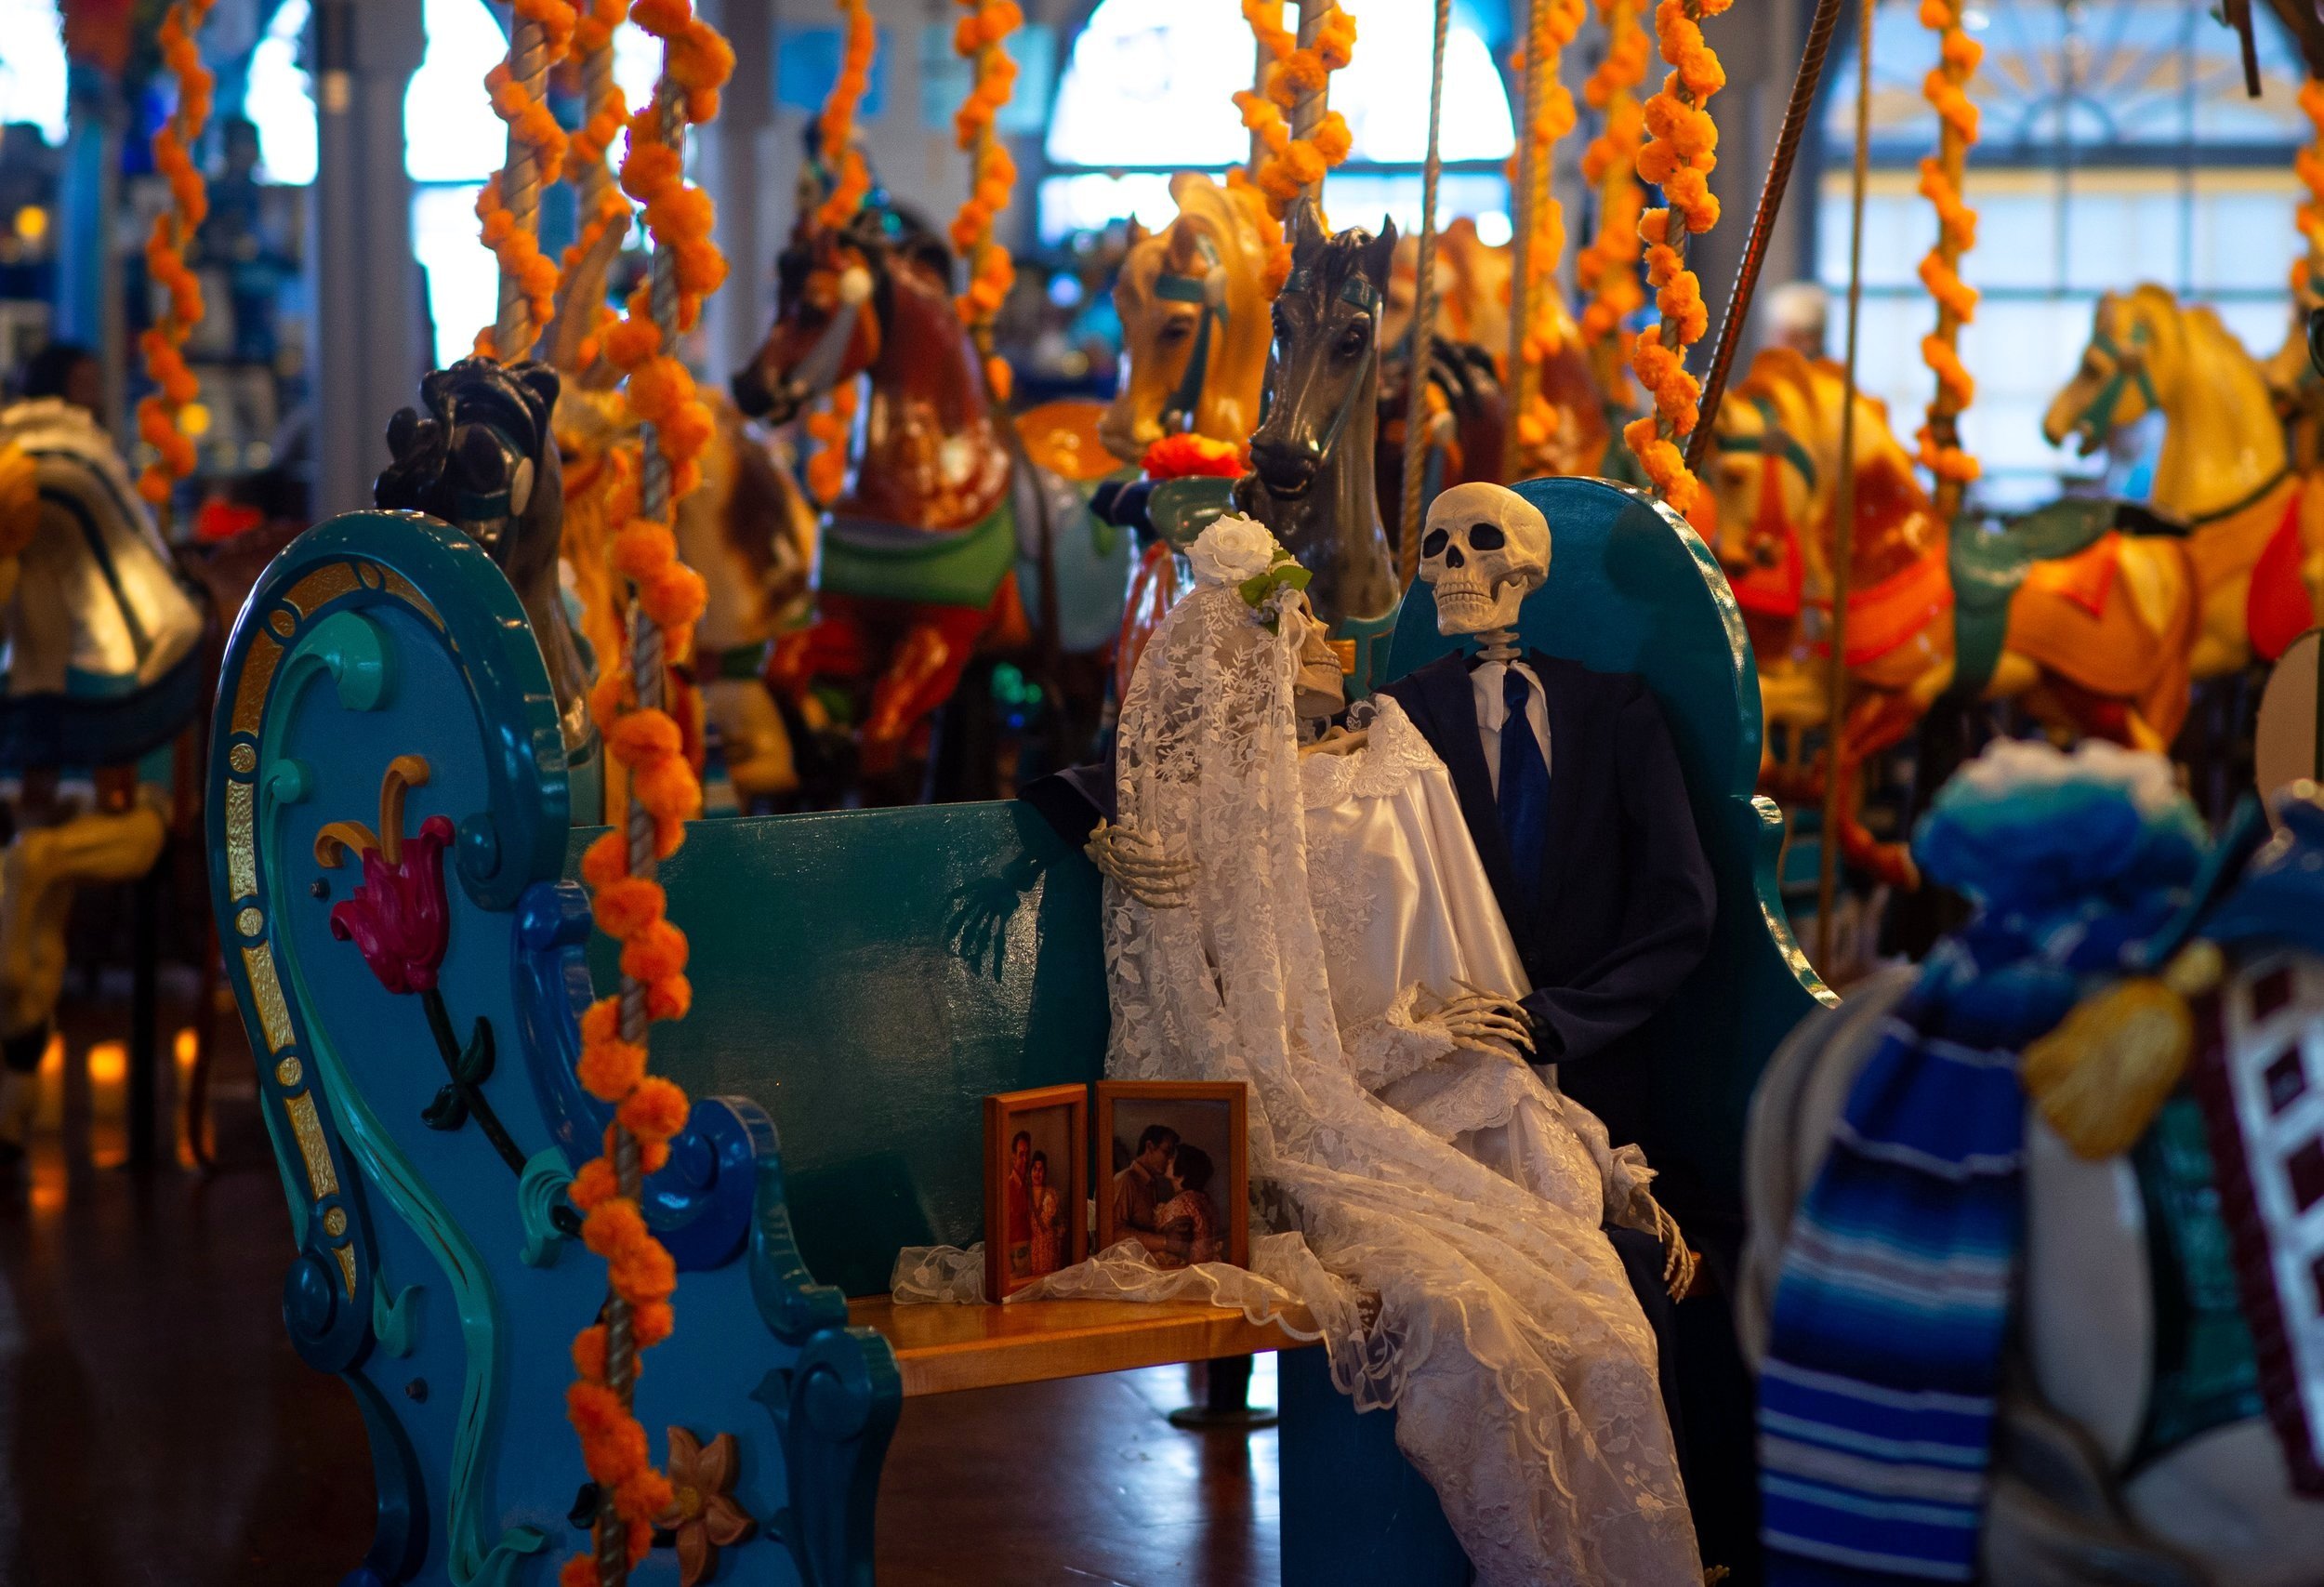  Dia de los Muertos event held inside the Santa Monica Pier Carousel where ofrendas where displayed which are offerings to the dead such as food and drinks. Dia de los Muertos is a traditional holiday celebrated on Nov. 1-2 and highly celebrated in M